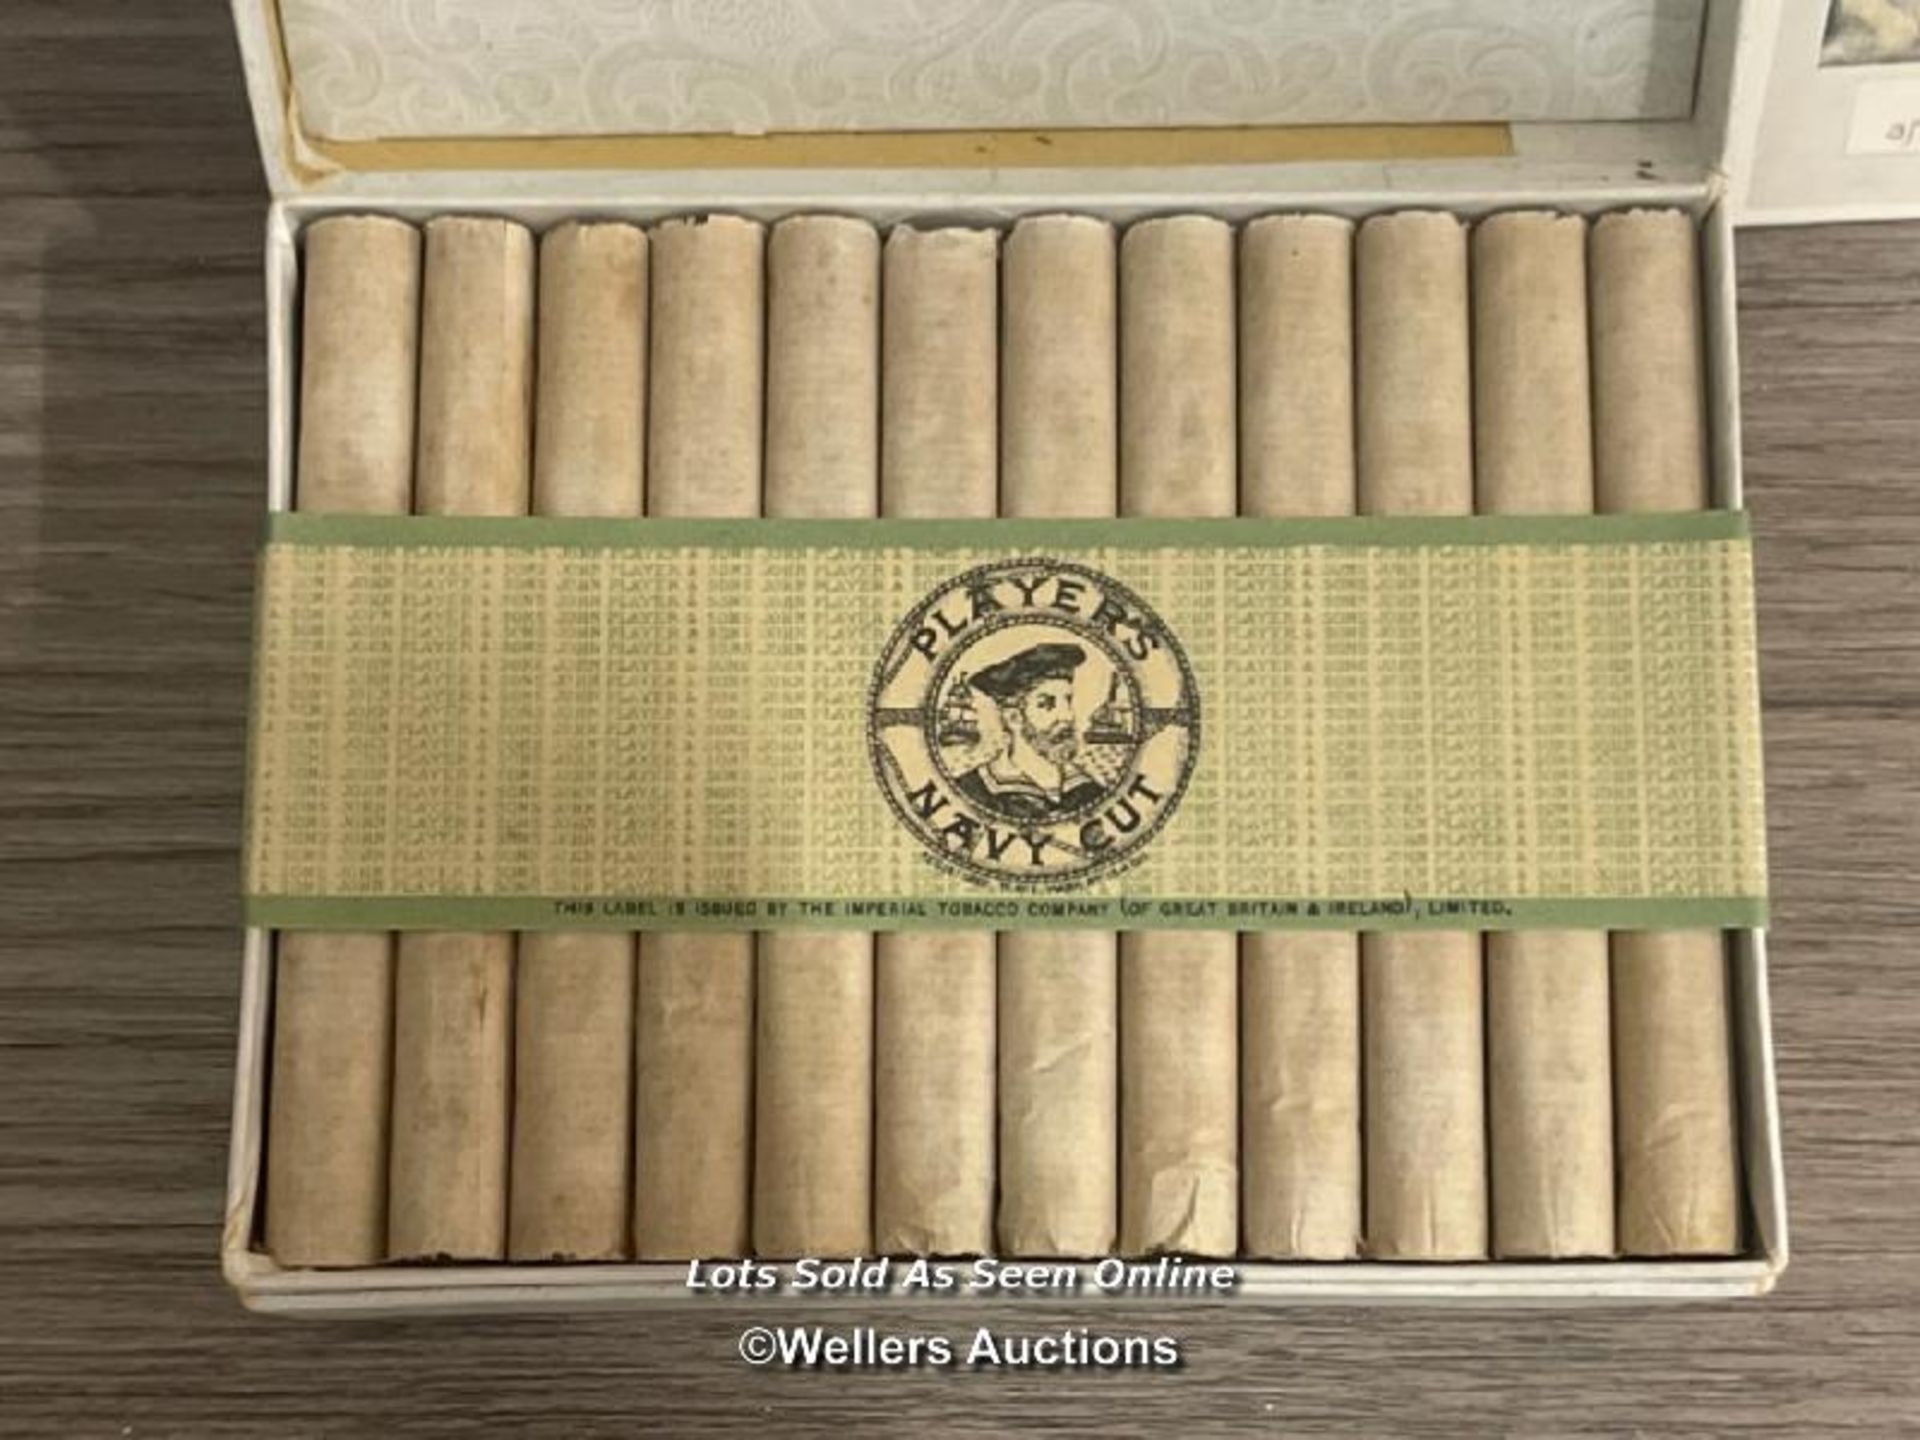 A RARE PACK OF 50 PLAYERS CIGARETTES, UNUSED AND STILL BANDED, COMPLETE WITH A LARGE CIGARETTE - Image 2 of 7